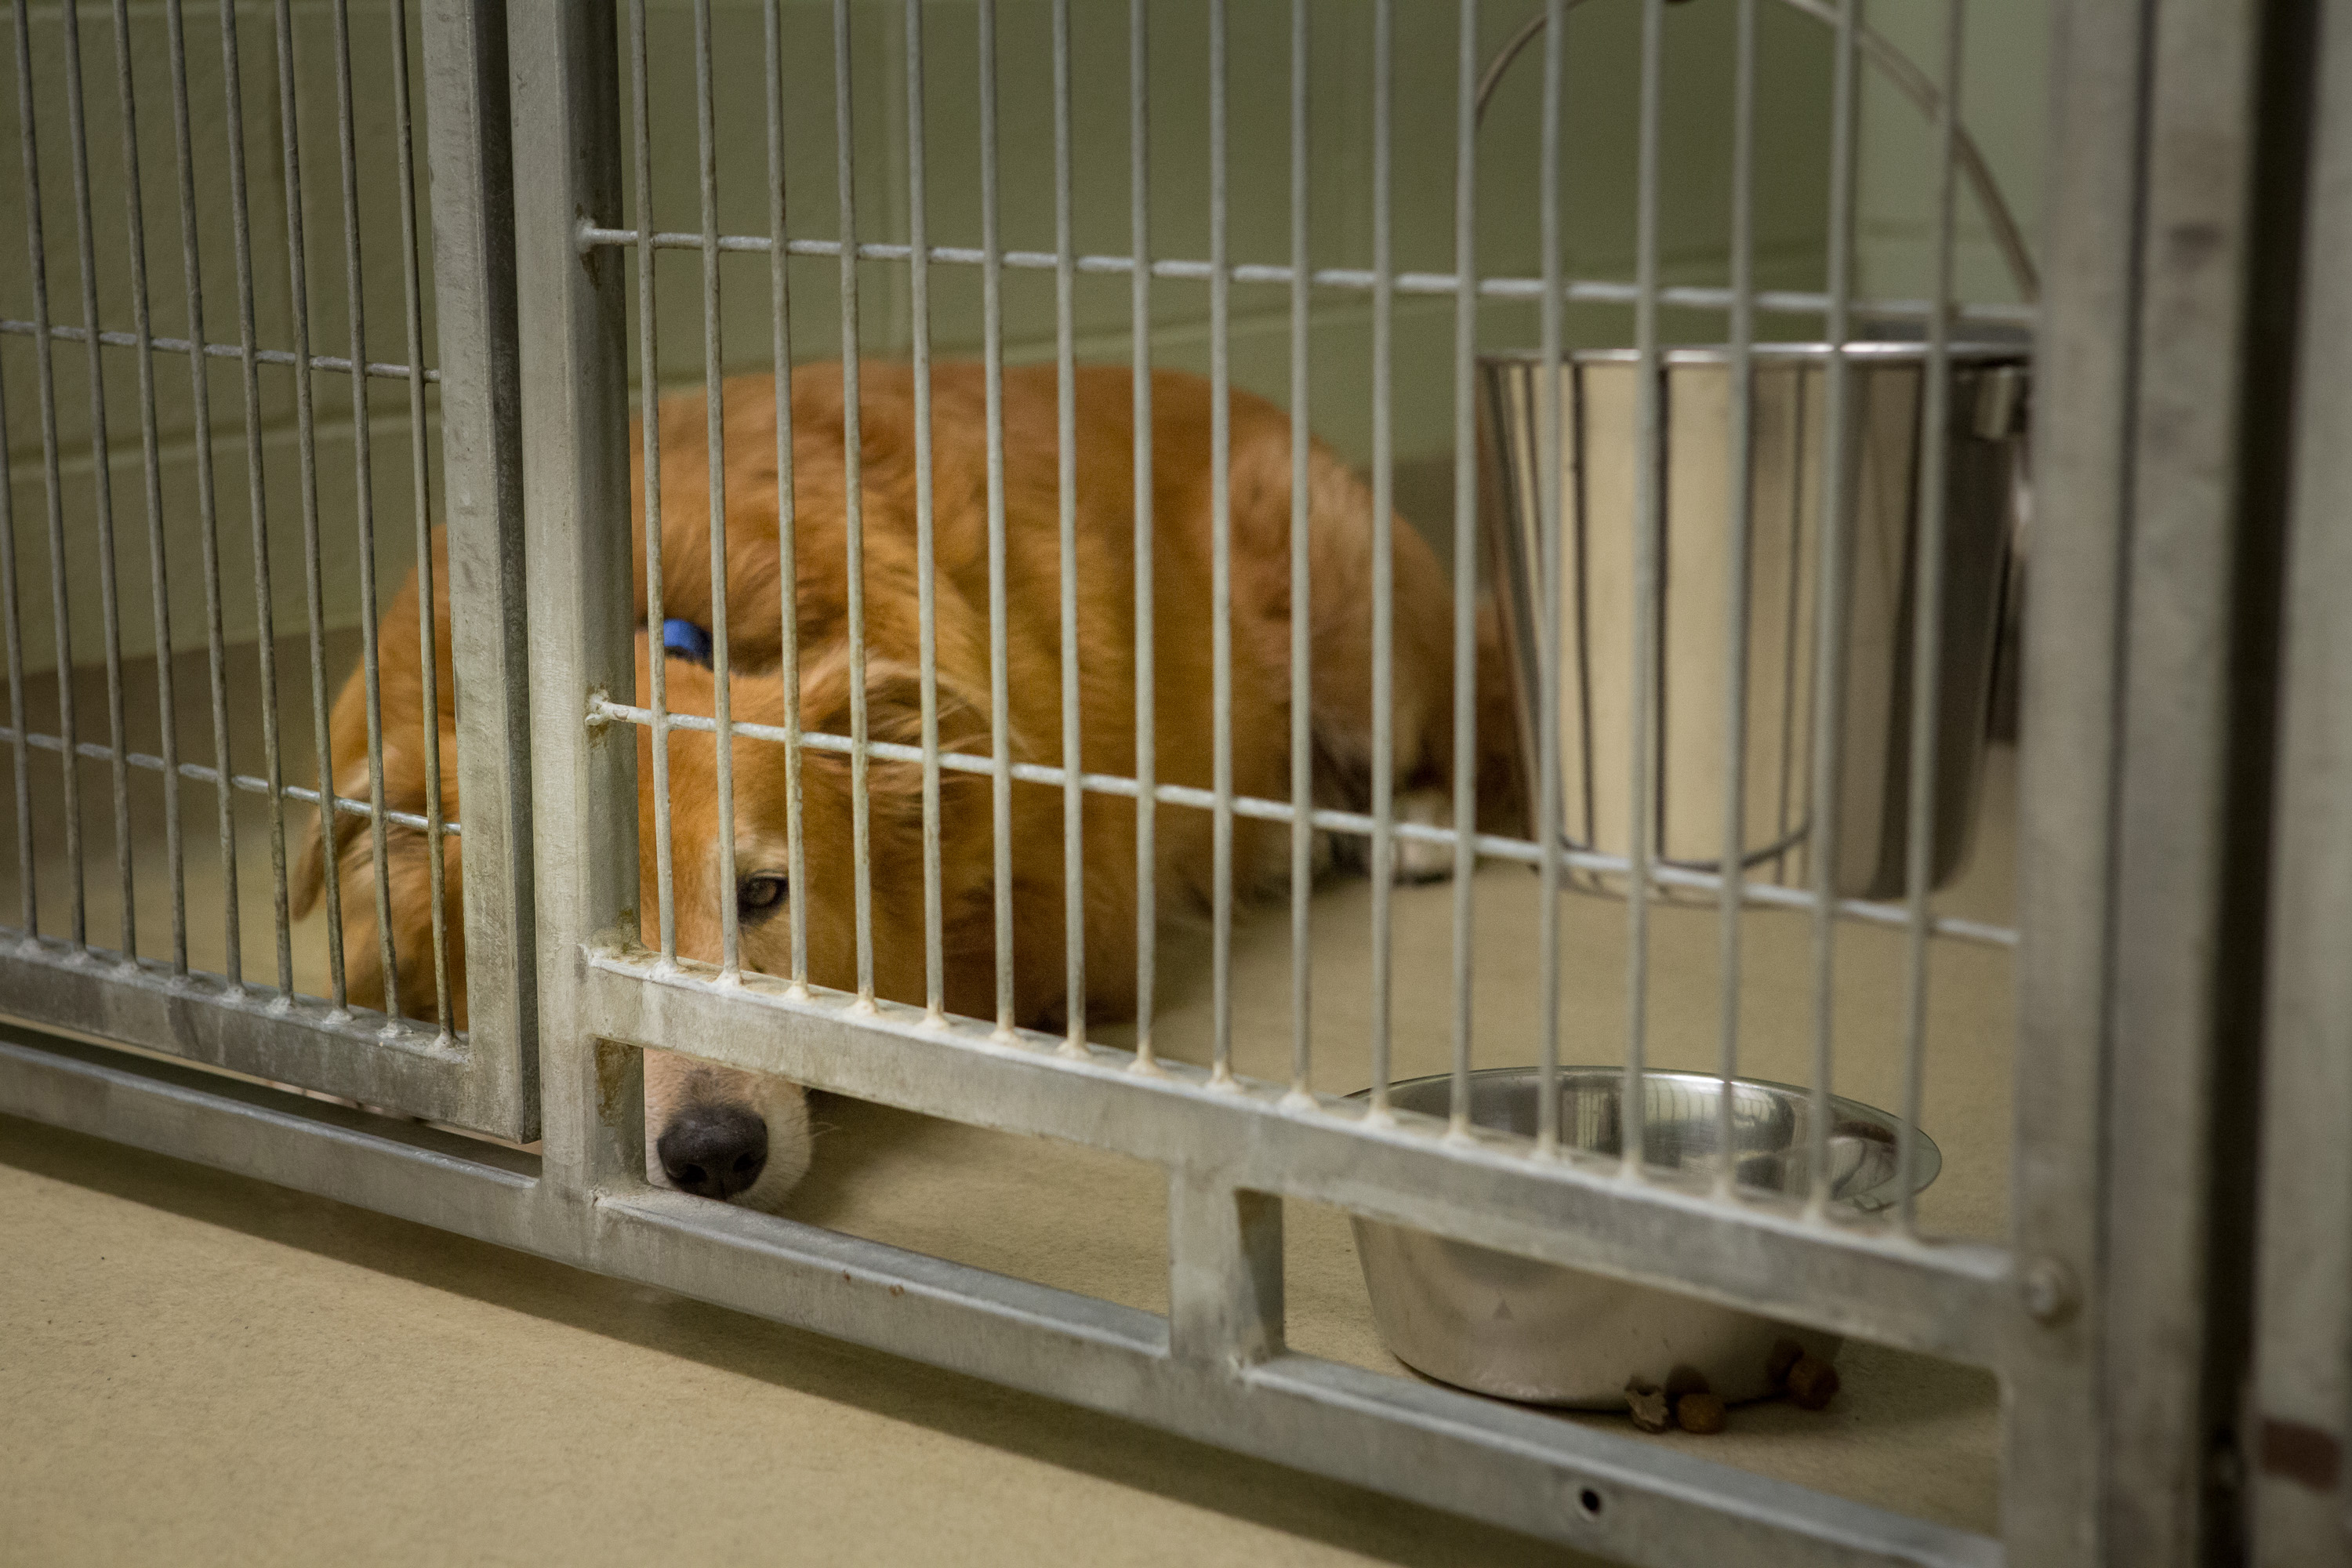 Dogs have had to endure days without air conditioning in the Humane Society for Hamilton County’s overcrowded shelter. (Staff photo by Sara Crawford)